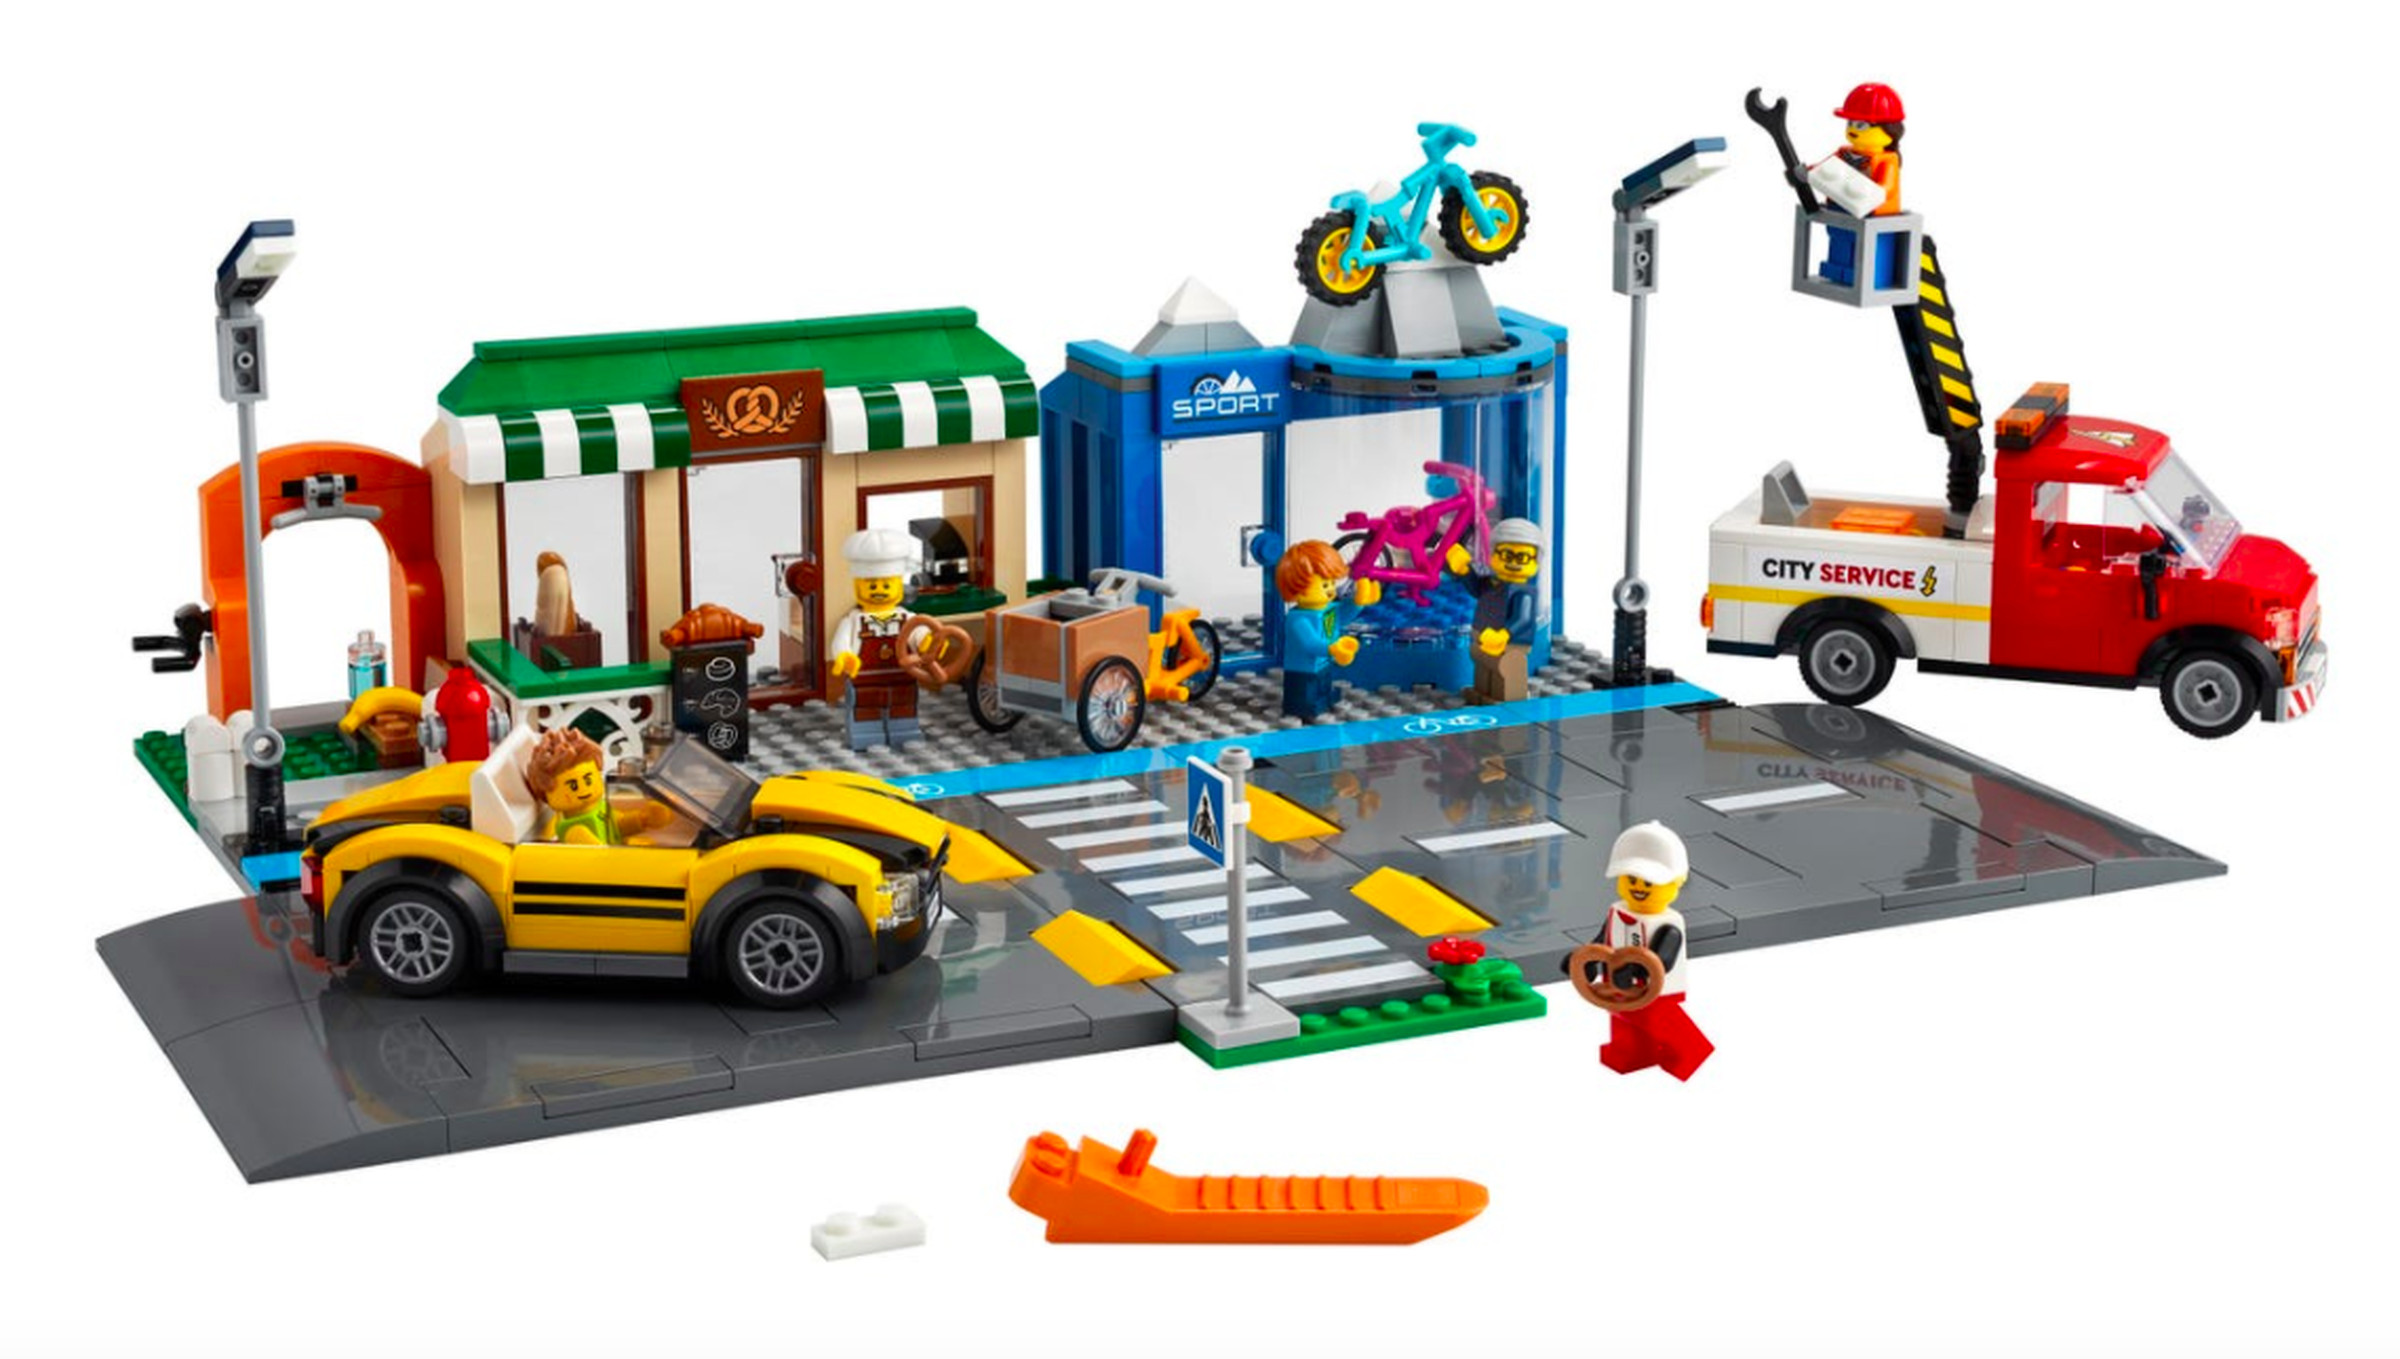 The new official Shopping Street lego set has a tiny blue bike lane next to a large road and small shops.